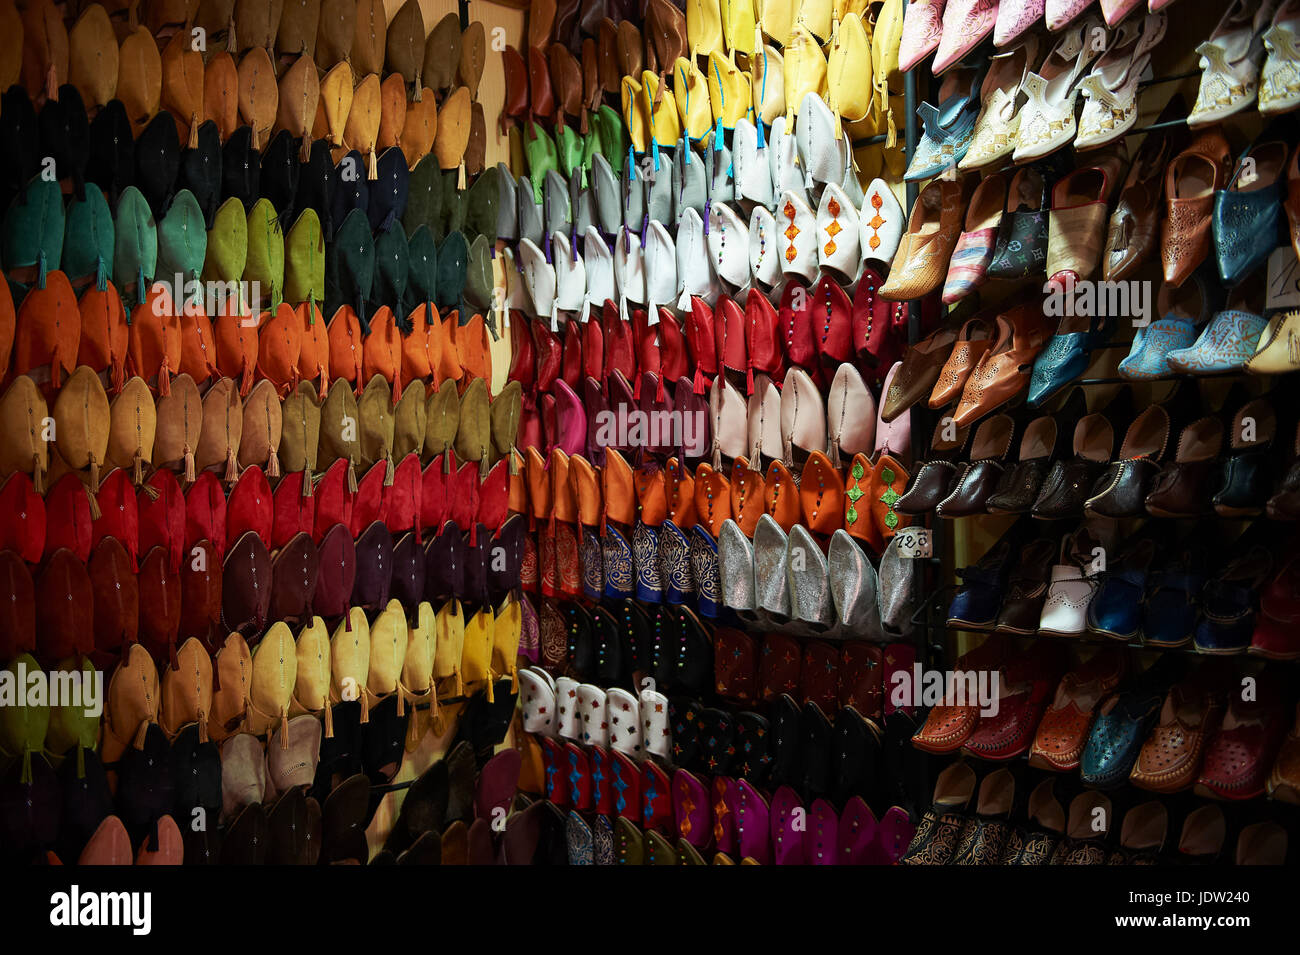 Wall full of shoes for sale Stock Photo